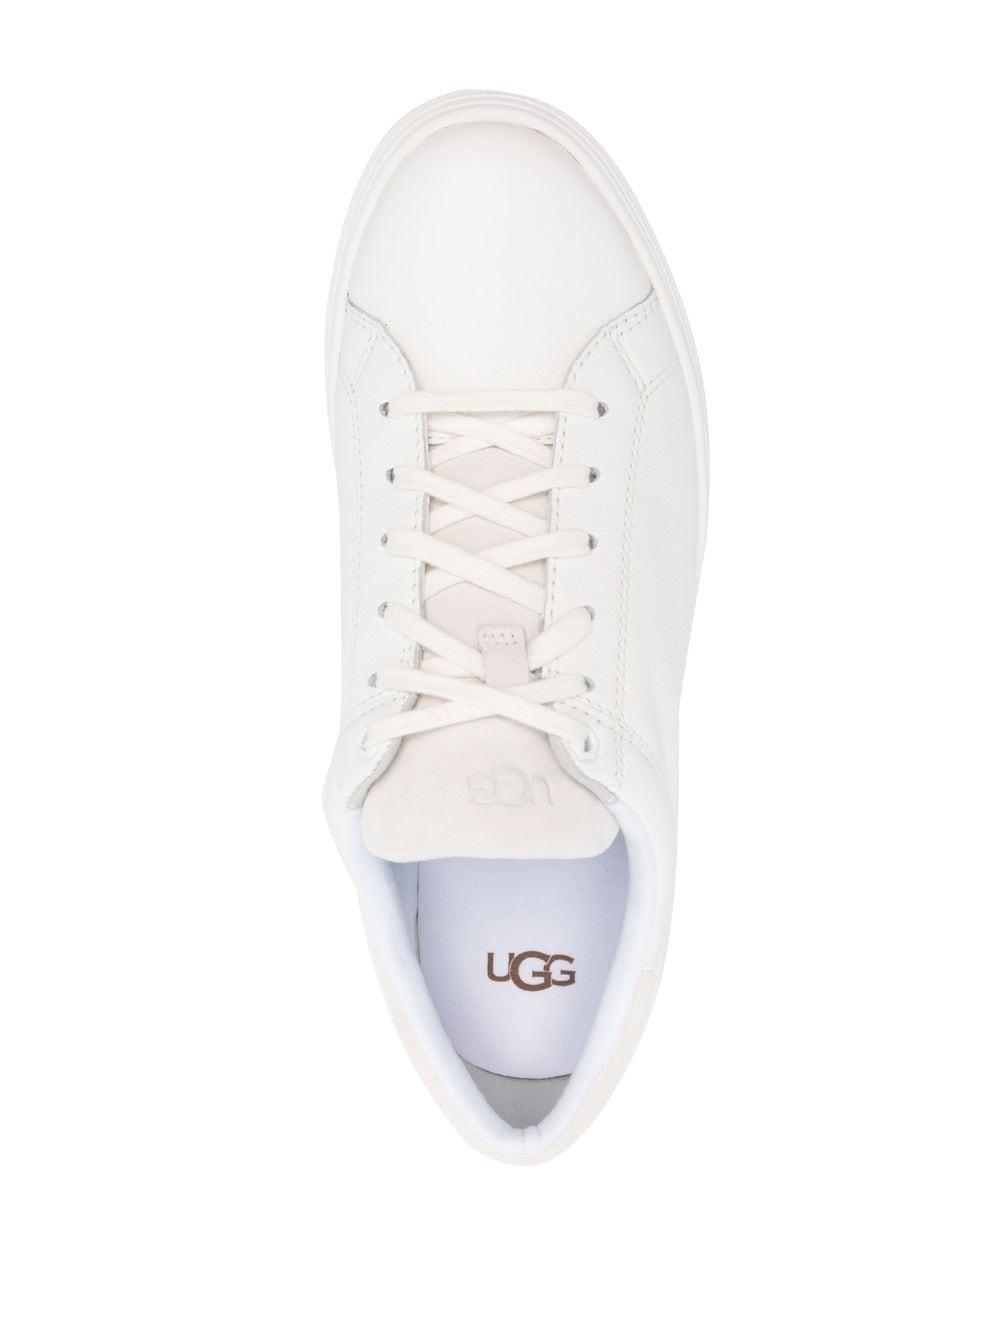 UGG Low-top Lace-up Sneakers in White for Men | Lyst